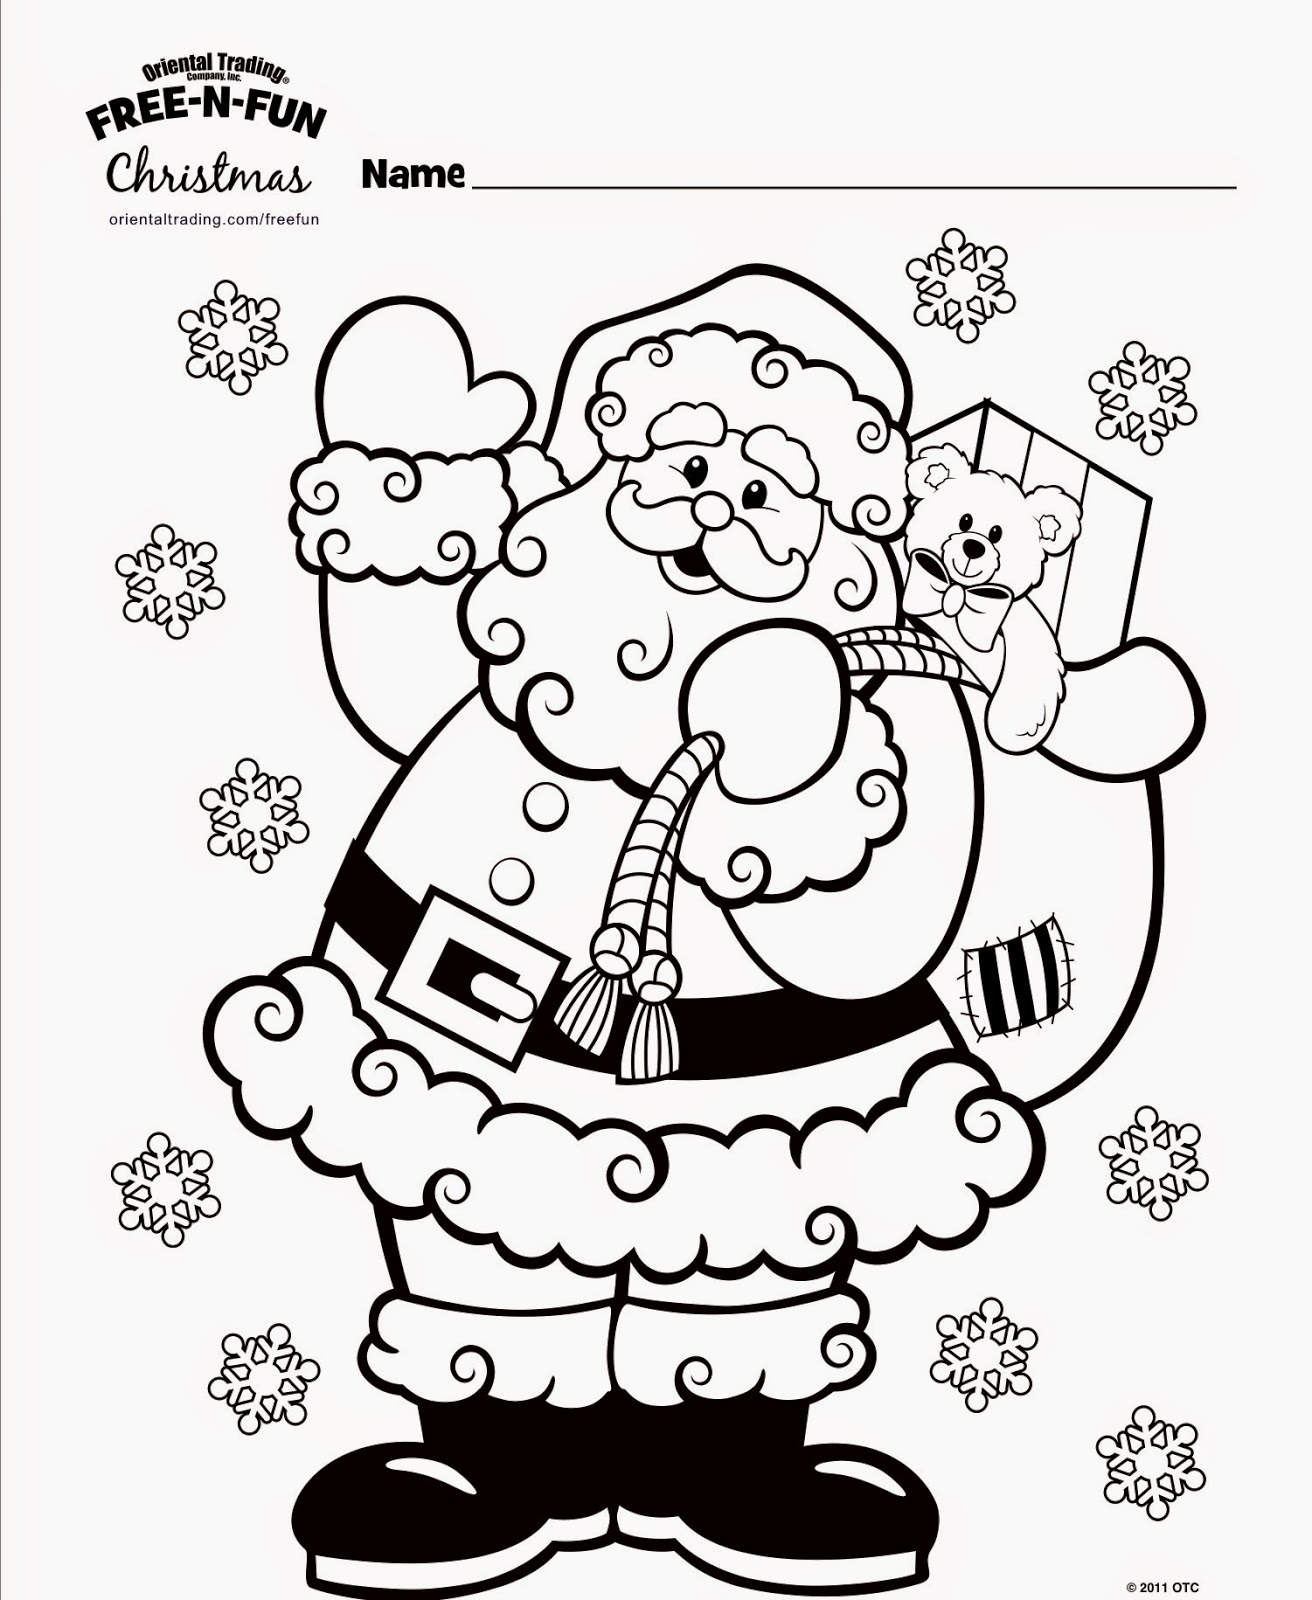 Download Carol Ann Kauffman's VISION and VERSE : Coloring Sheets from FREE-N-FUN Christmas